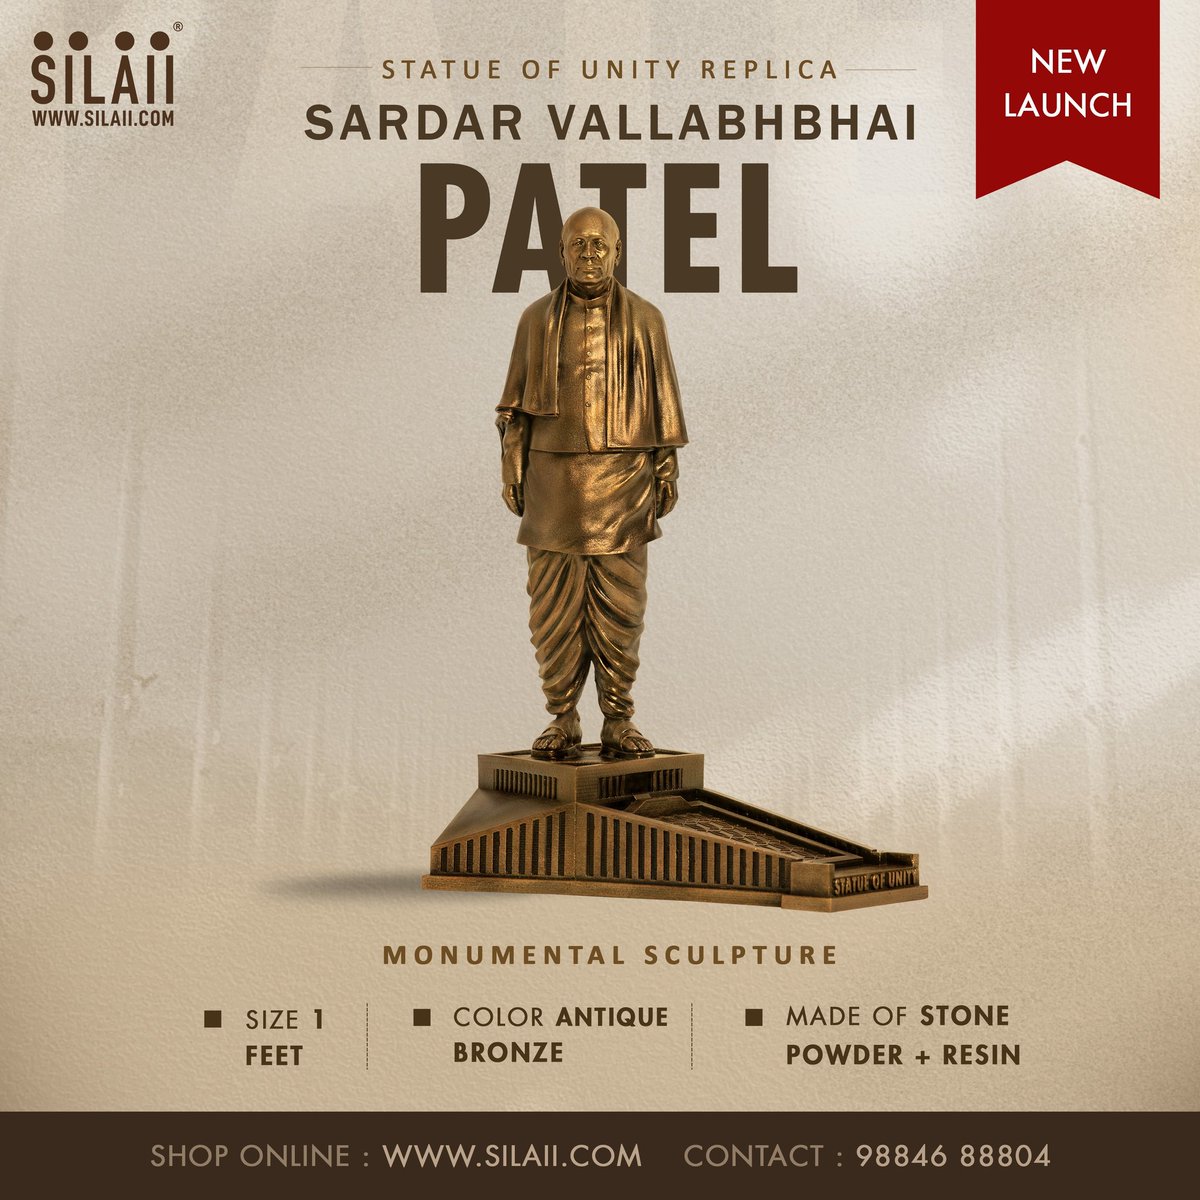 silaii.com/products/world… Experience the Grandeur of the World's Tallest Statue in Your Home with SILAII ✨ #StatueOfUnity #SardarPatel #SardarVallabhbhaiPatel #Patel #Replica #Sculpture #SILAII #MonumentalSculpture #Monument #WorldsTallestStatue #Statue